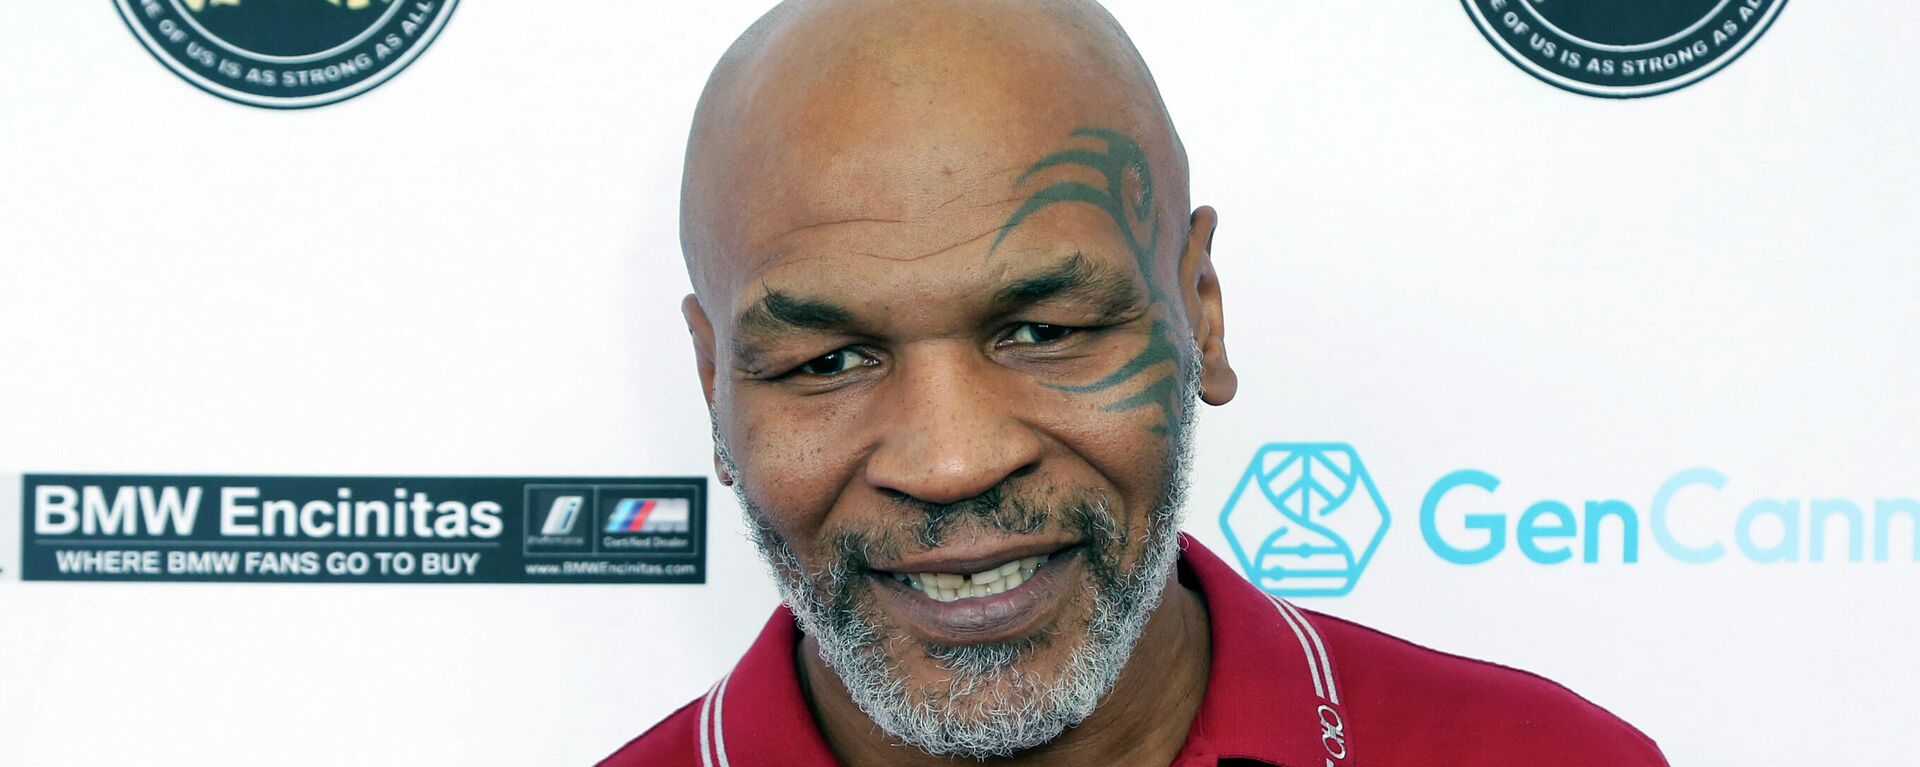 In this Aug. 2, 2019, file photo, Mike Tyson attends a celebrity golf tournament in Dana Point, Calif. - Sputnik International, 1920, 26.11.2021